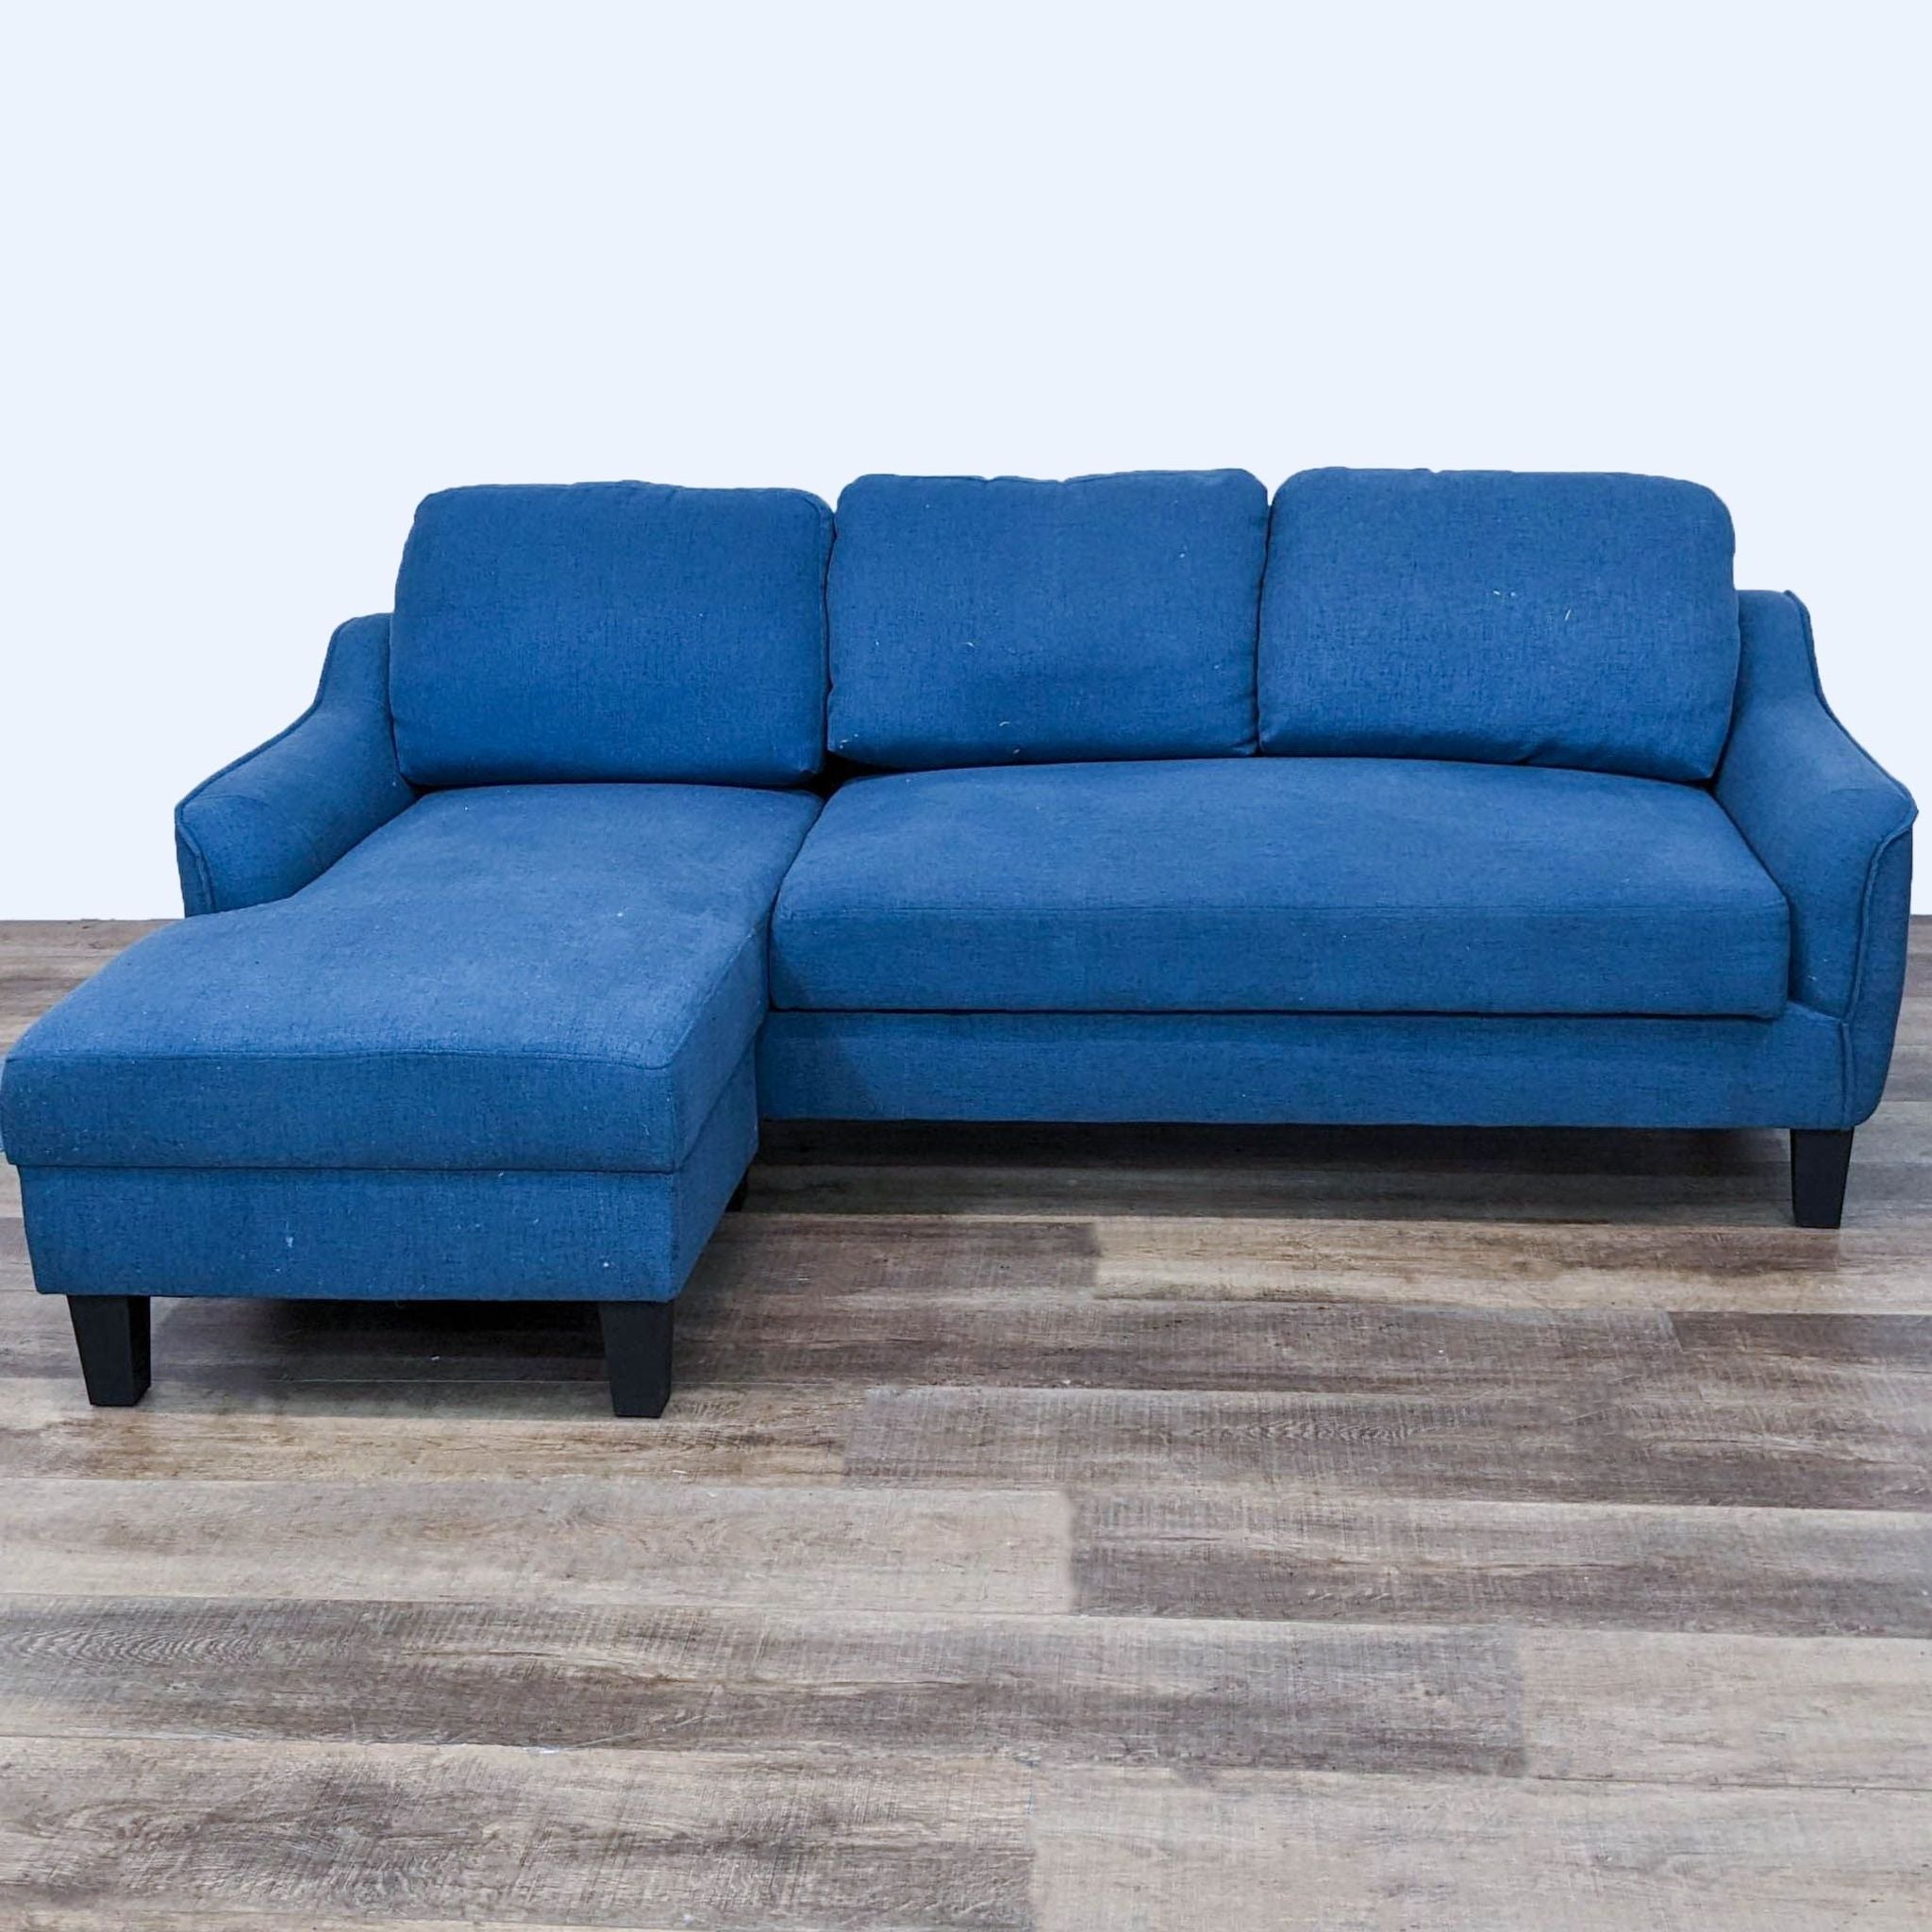 Reperch contemporary blue sectional with chaise and dark wood feet on a wooden floor.